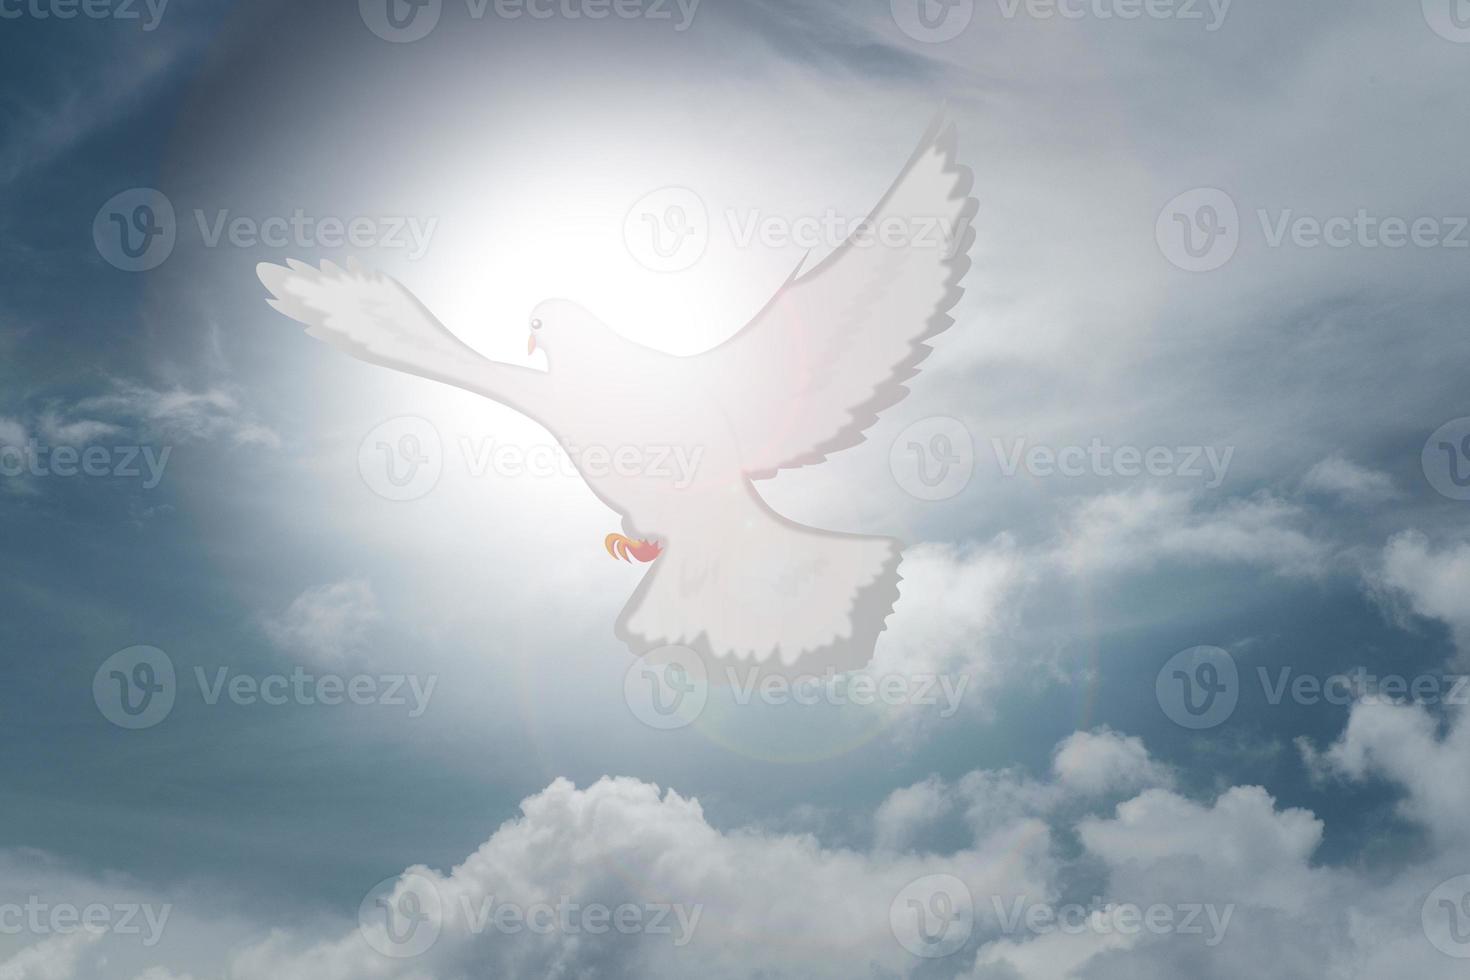 Doves fly in the sky. Christians have faith in Holy Spirit. silhouette worship to god with love Faith, Spirit and jesus christ. Christian praying for peace. Concept of worship in Christianity. photo